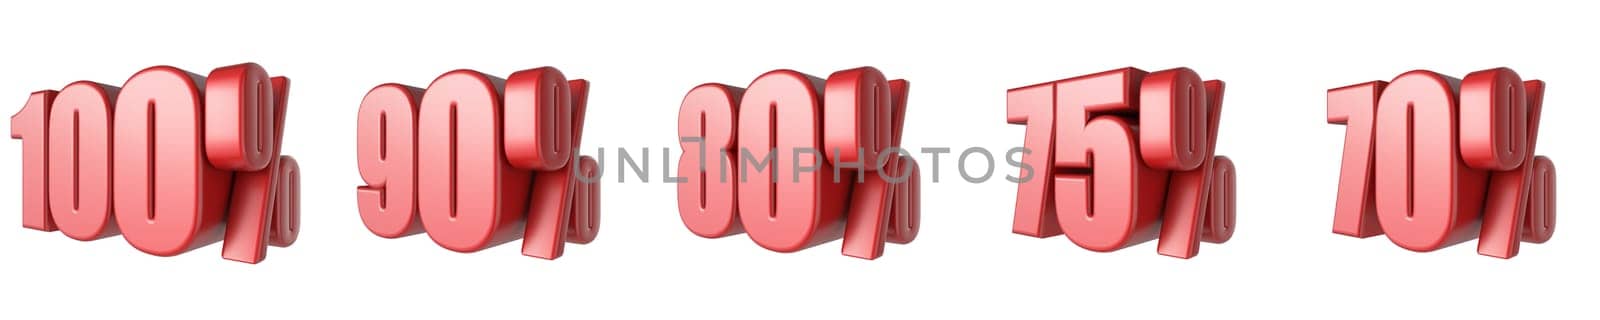 70, 75, 80, 90, 100 Red percent signs 3D rendering illustration isolated on white background